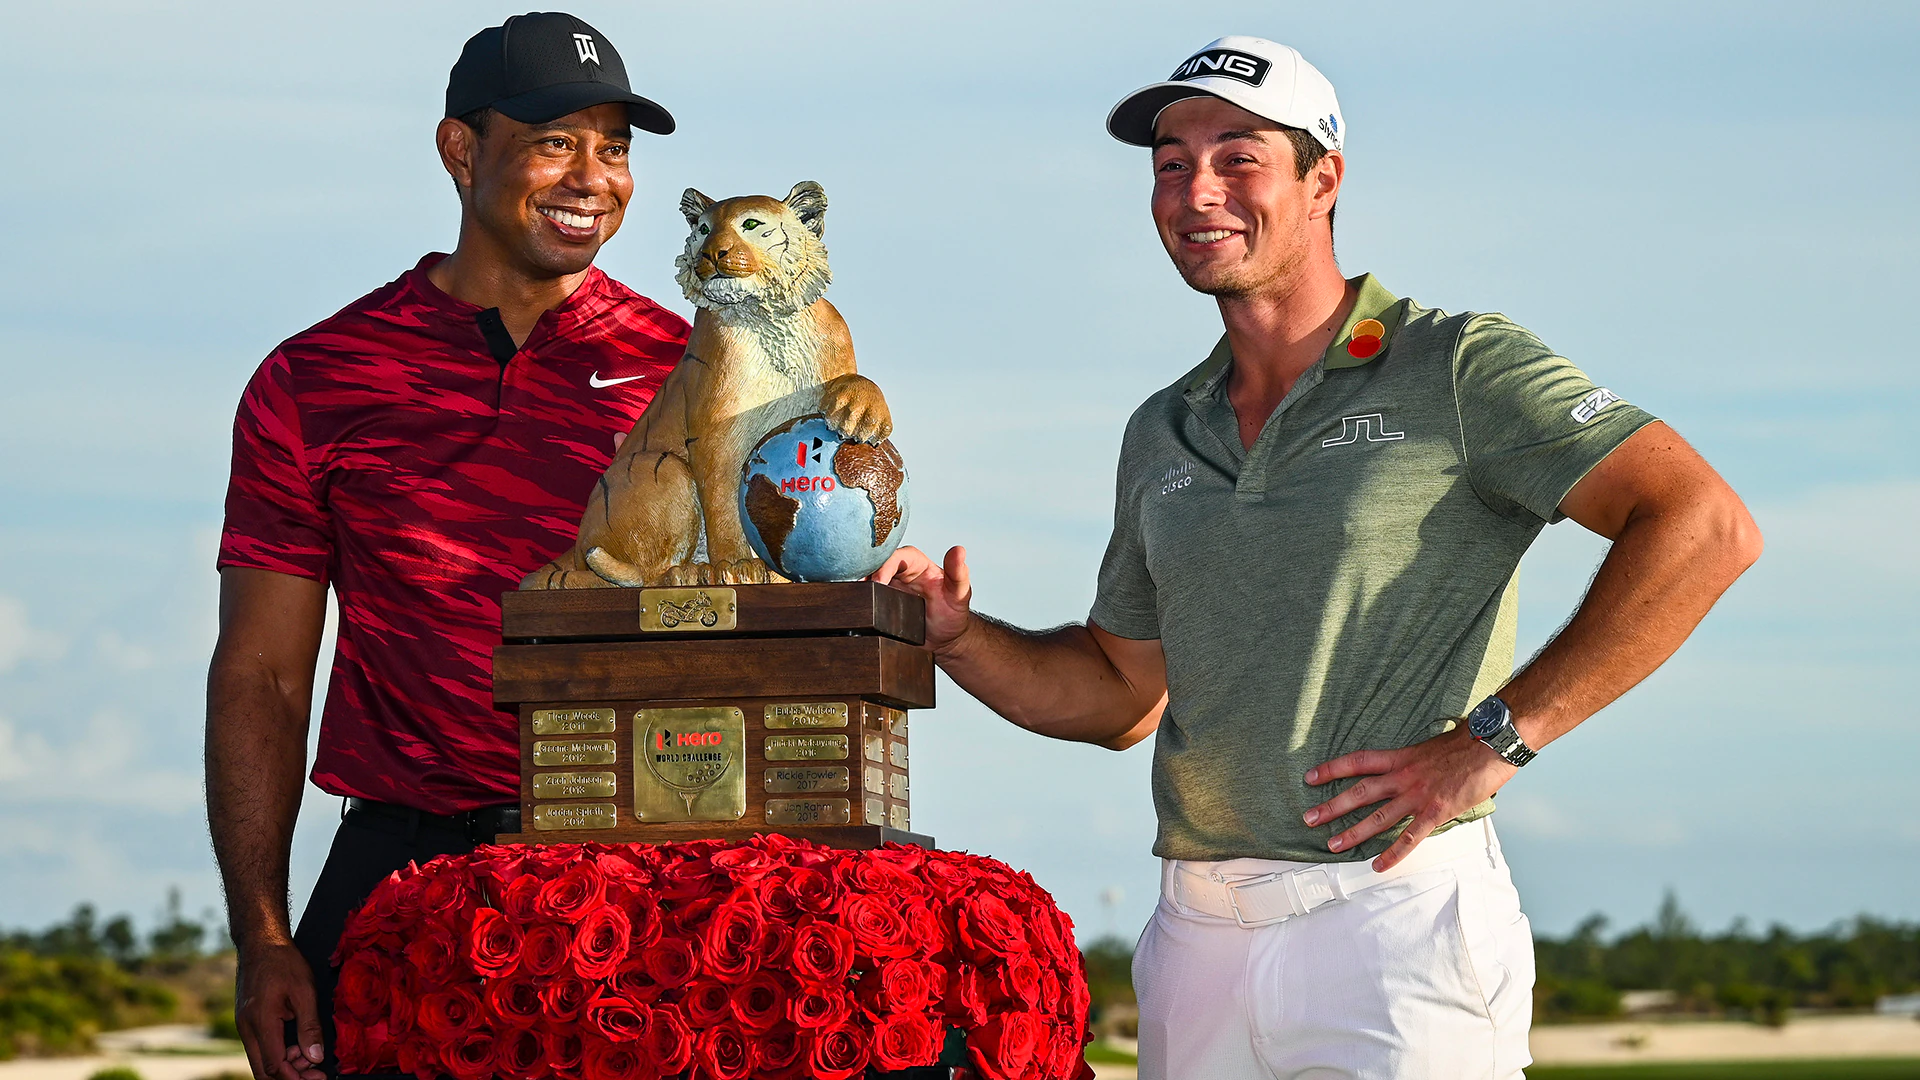 Viktor Hovland’s Hero win shows why Tiger Woods’ latest comeback may be even tougher